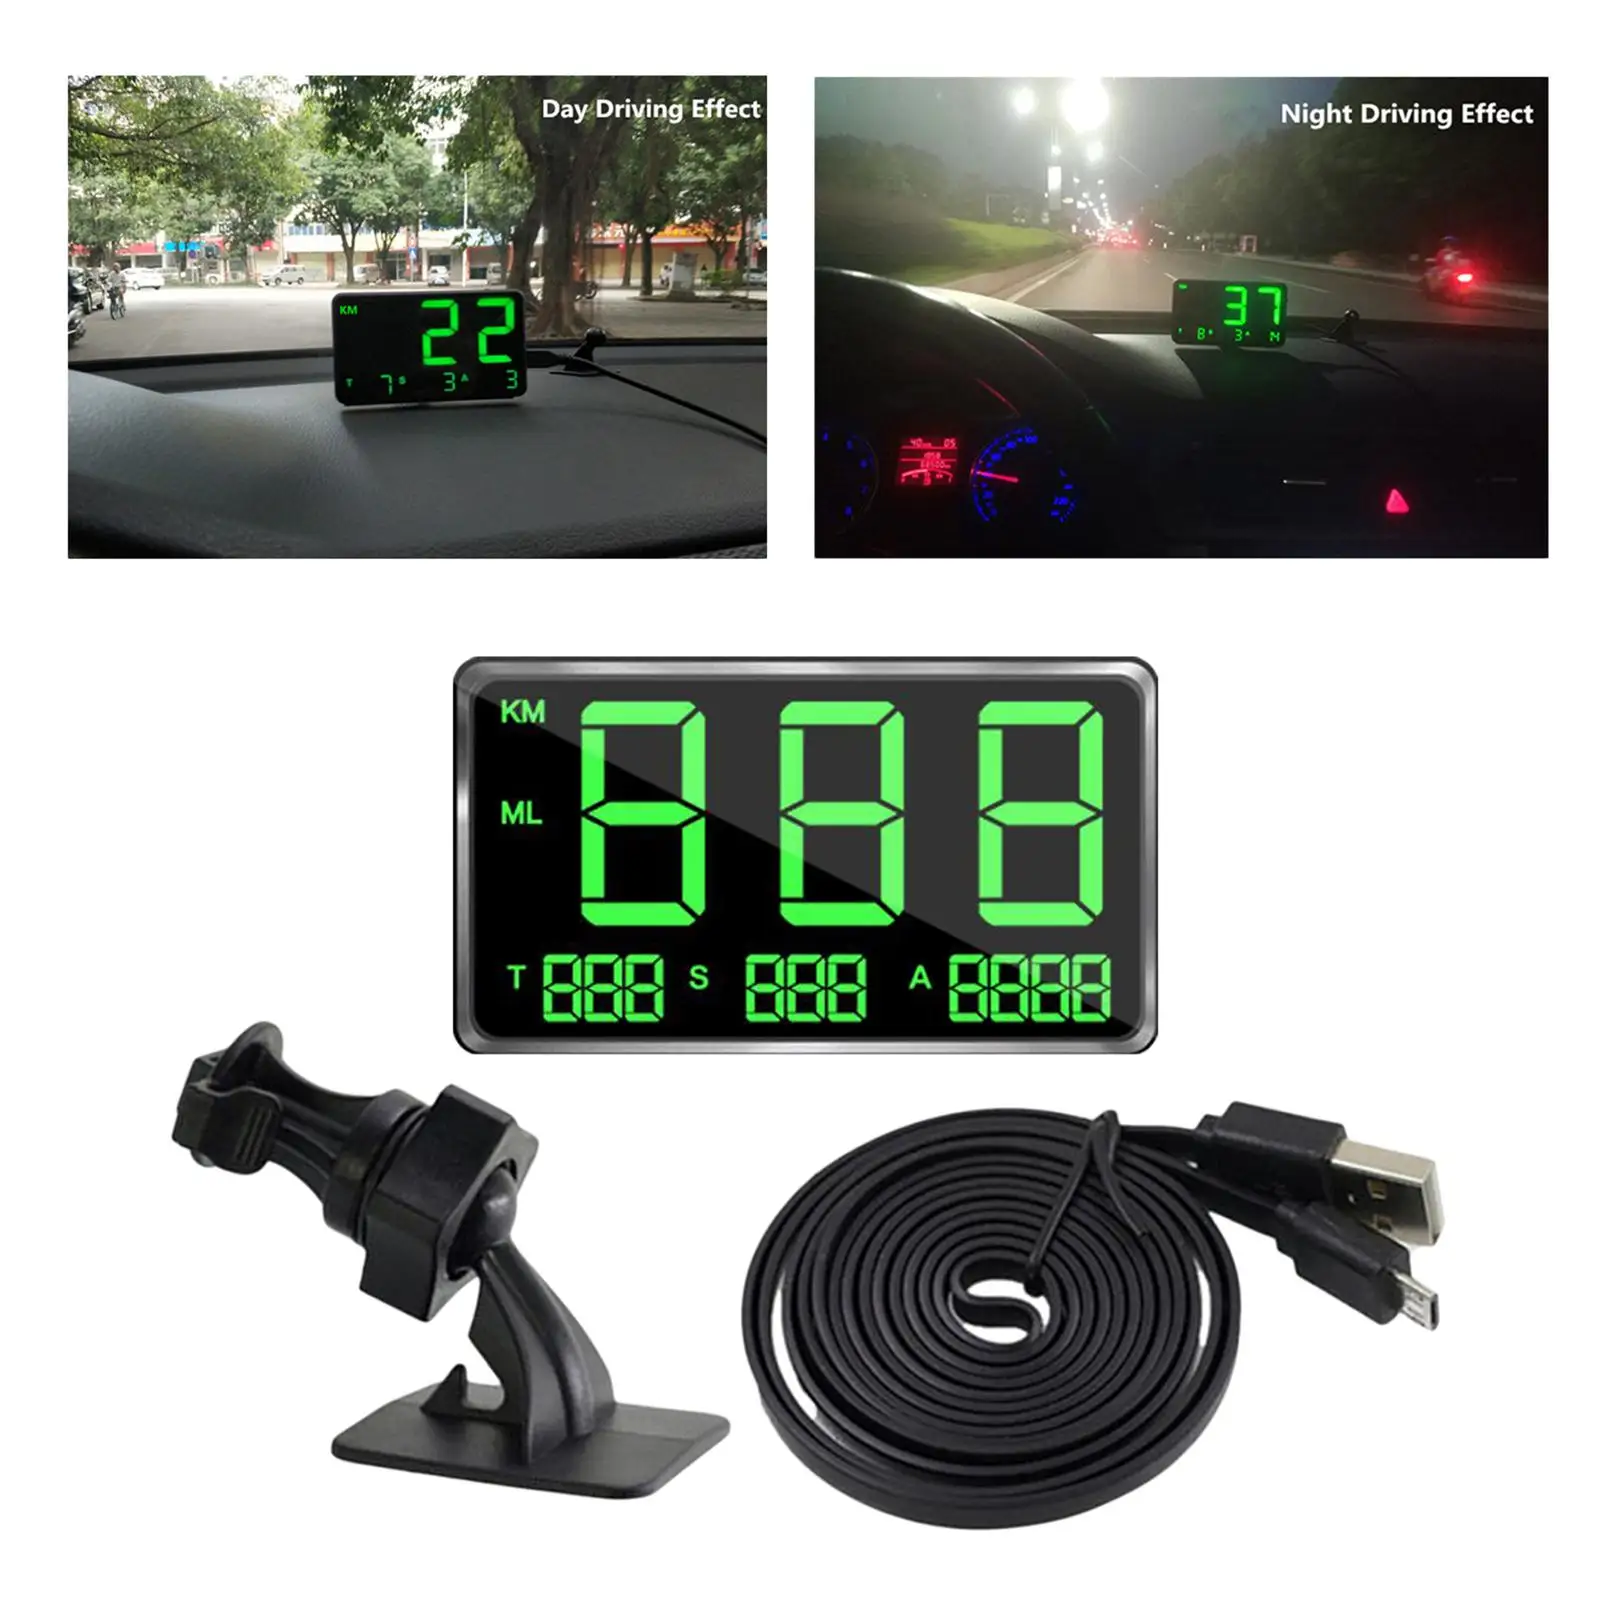  Big Fonts Overspeed Warning LED Display  Display for Golf All Cars SUV Pick- Driving